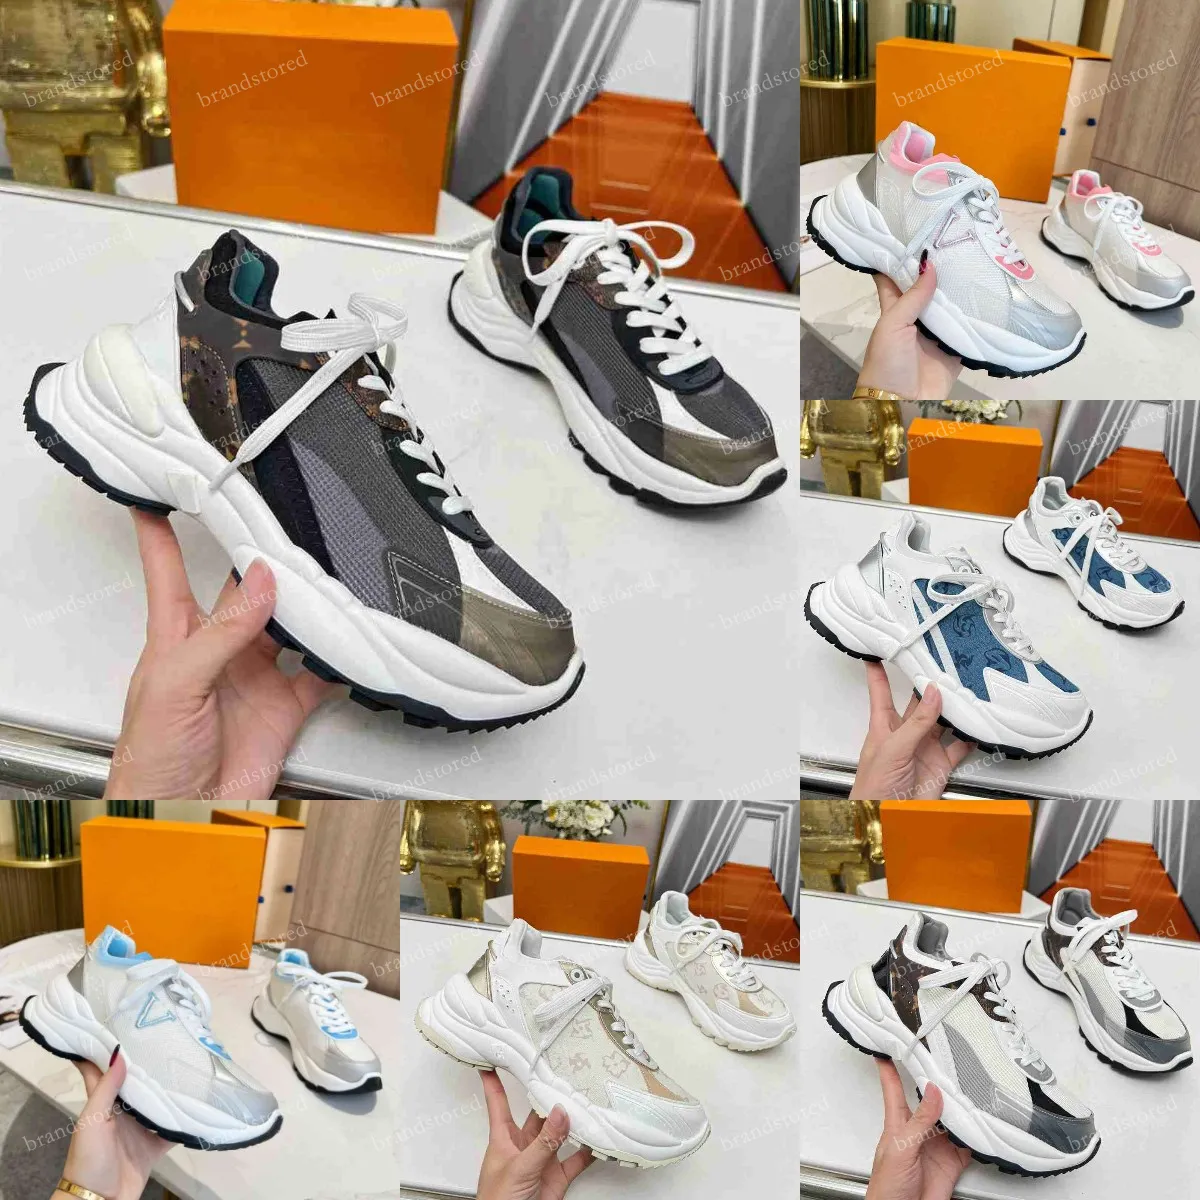 Run 55 Sneaker Designer Shoes Women Shoes Run Away Sneaker Fashion Classic High quality Rubber Leather Outdoors Low-top Sneakers Size 35-41